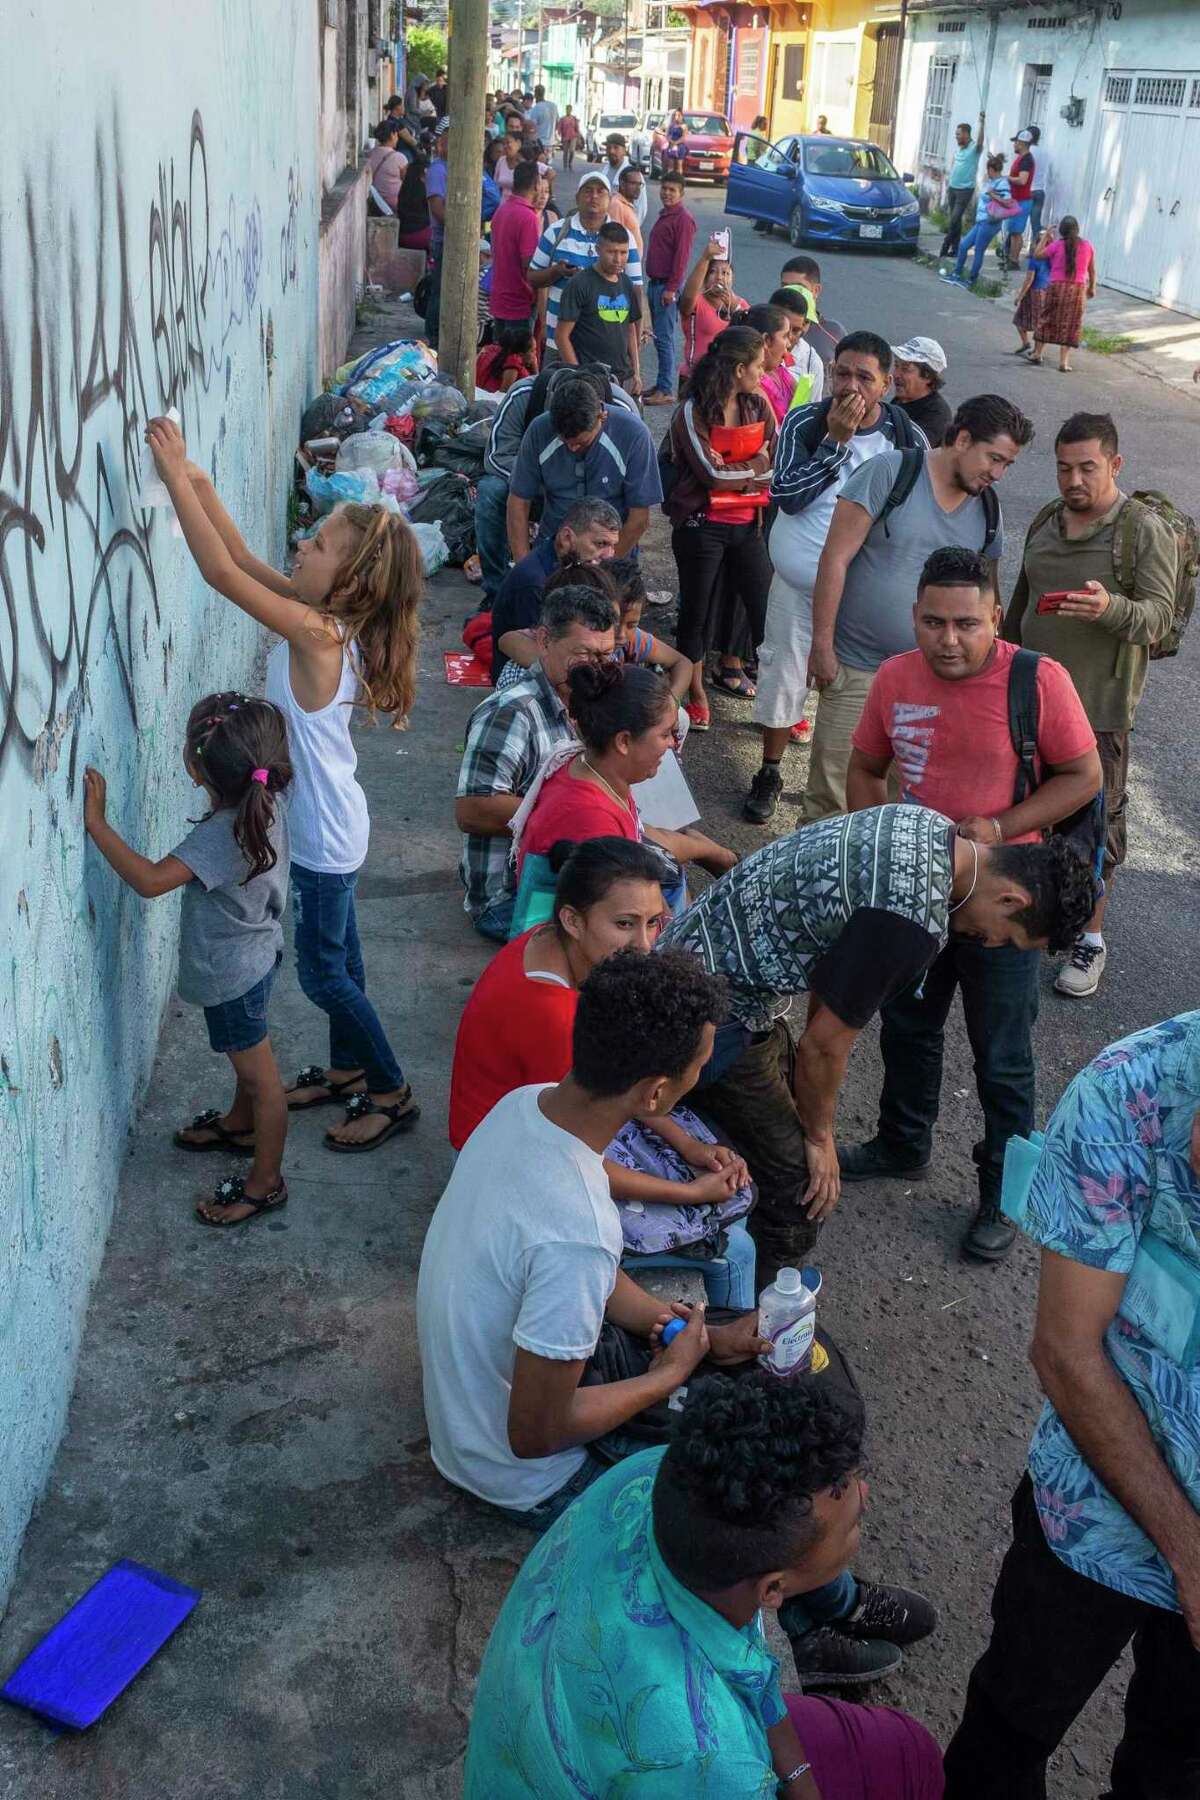 Here migrants line up outside the offices of COMAR (Comisión Mexicana de Ayuda a Refugiados) in Tapachula in hopes of receiving a visa that will let them remain in Mexico legally.